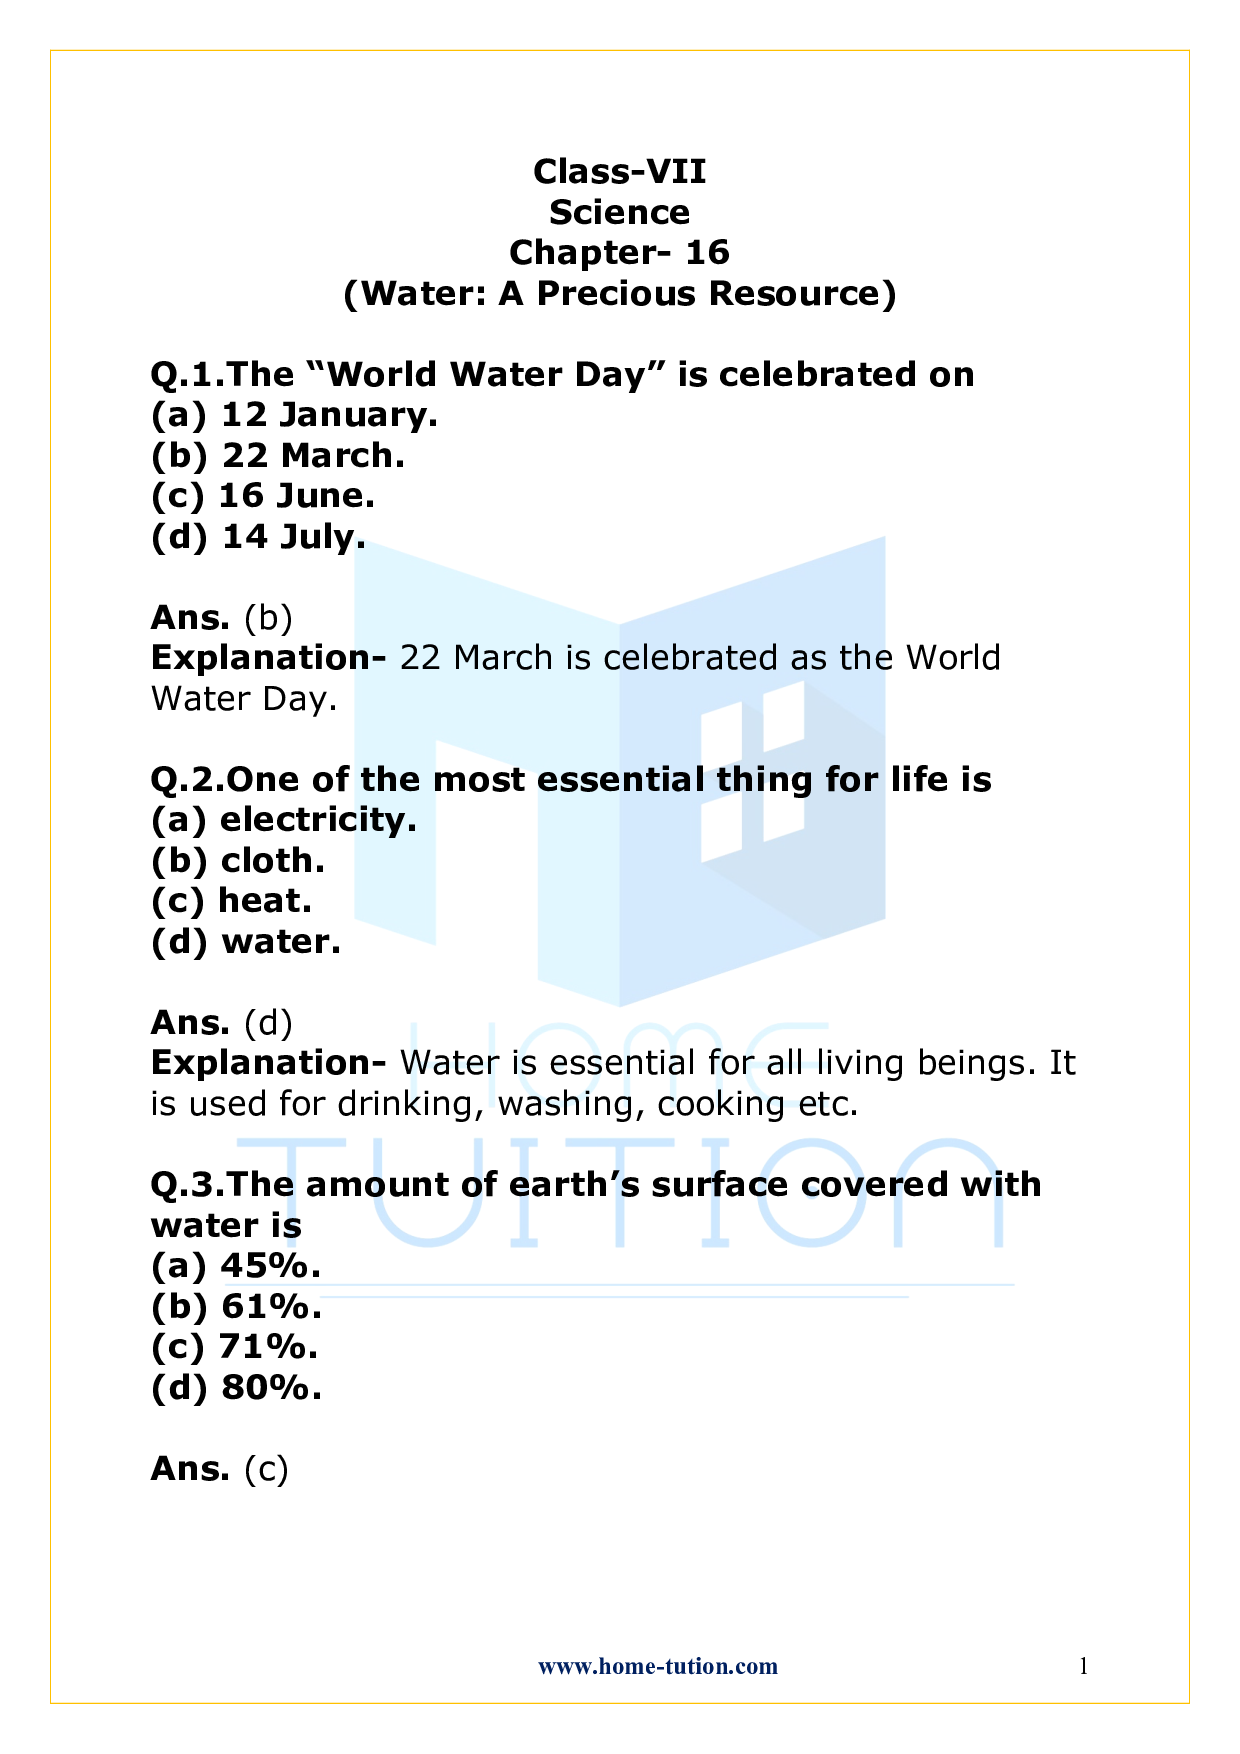 Chapter 16 Water: a precious resource